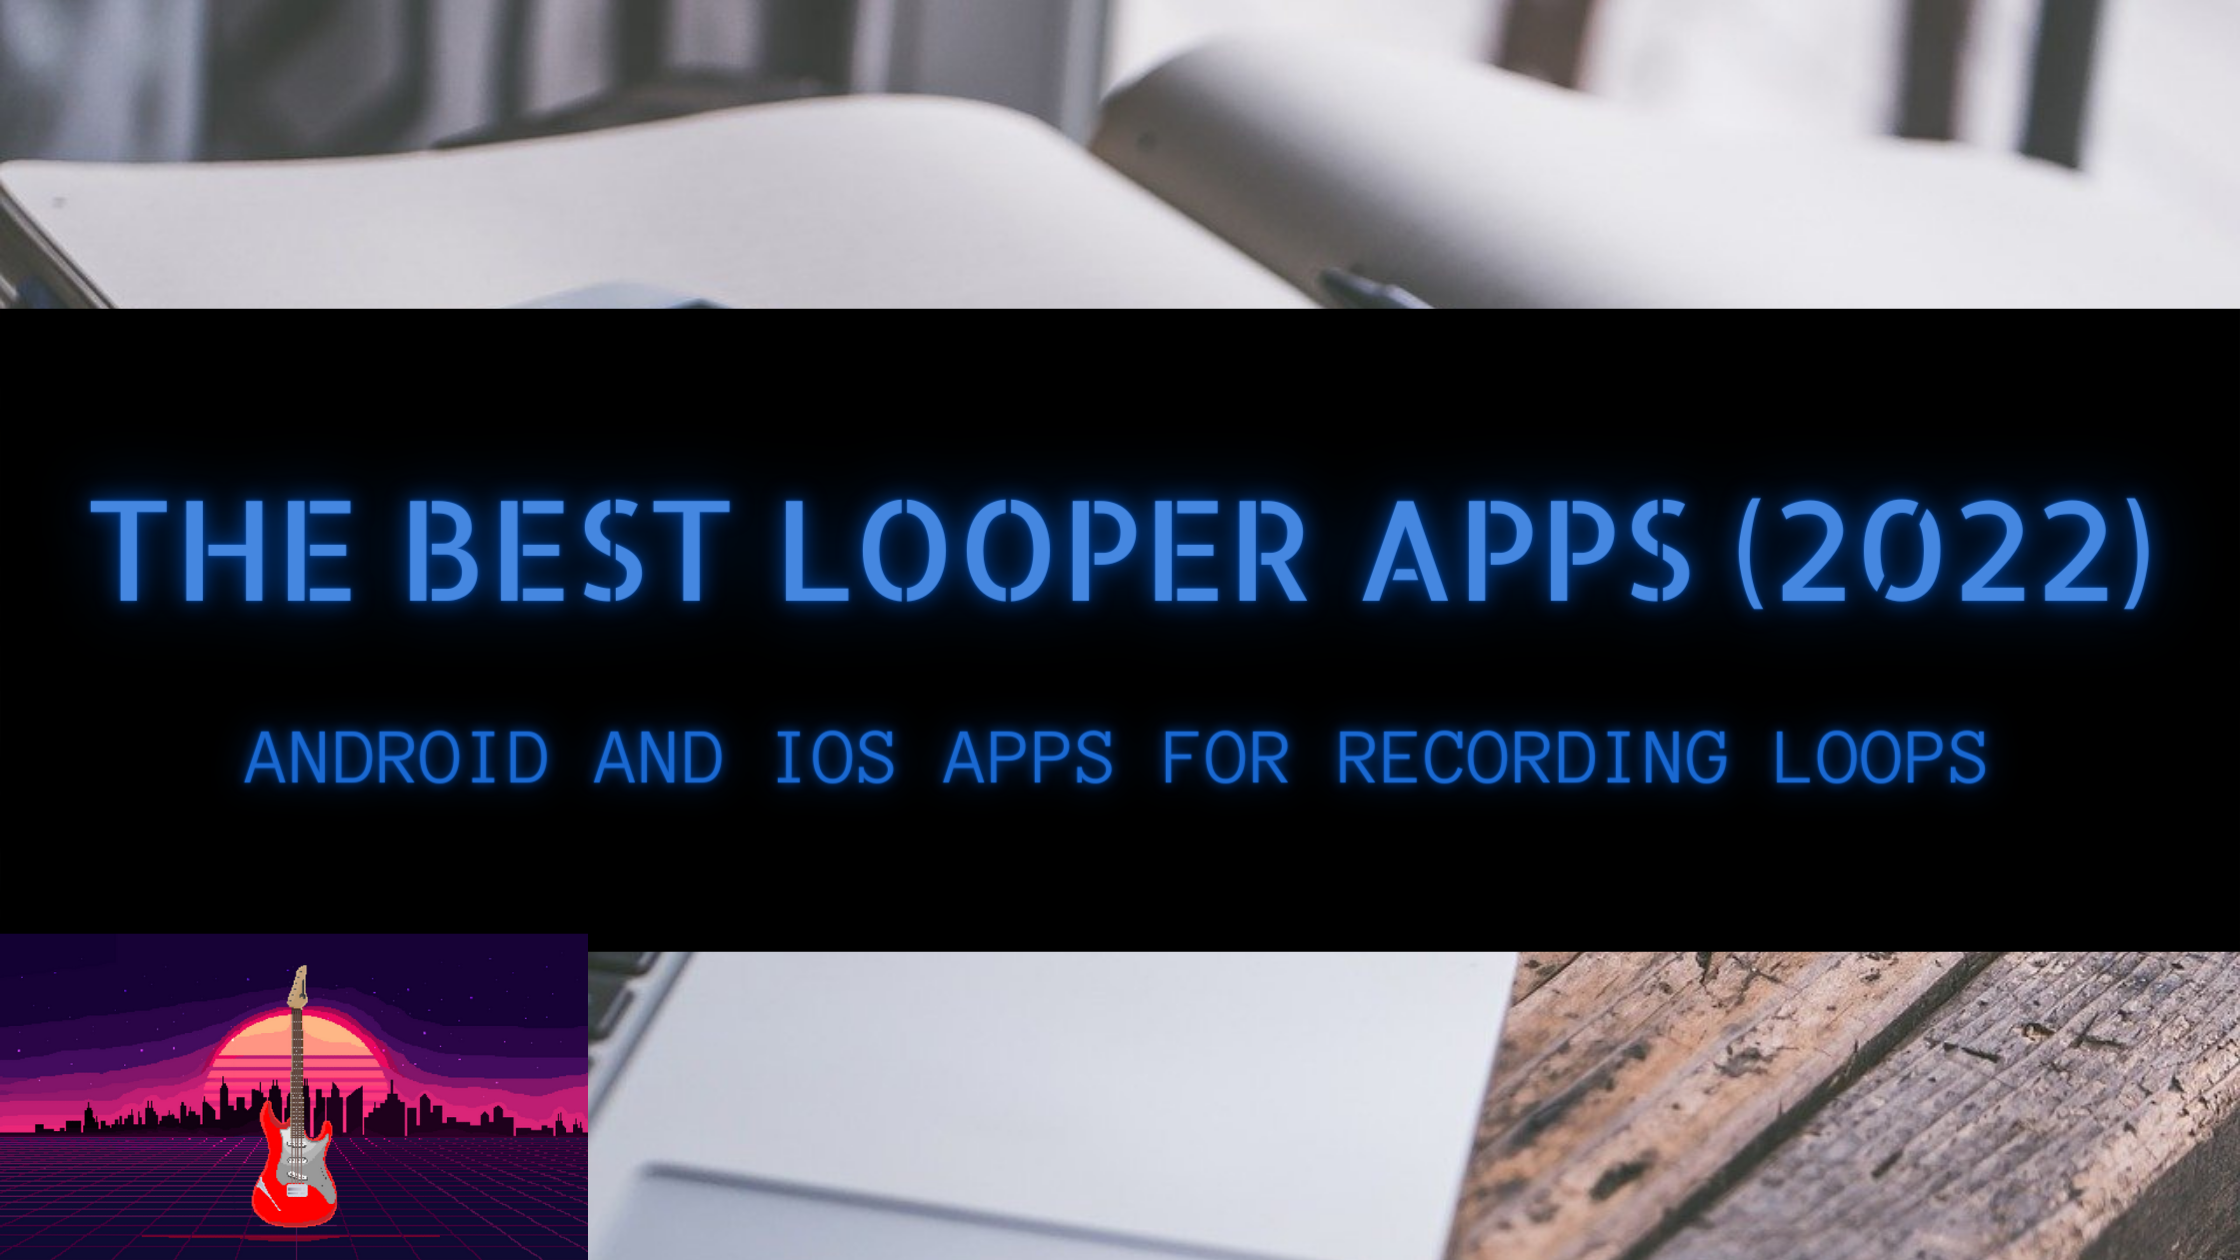 THE BEST LOOP STATIONS EMULATORS FOR ELECTRIC GUITAR AND ACOUSTIC GUITAR (UPDATED TO 2022)